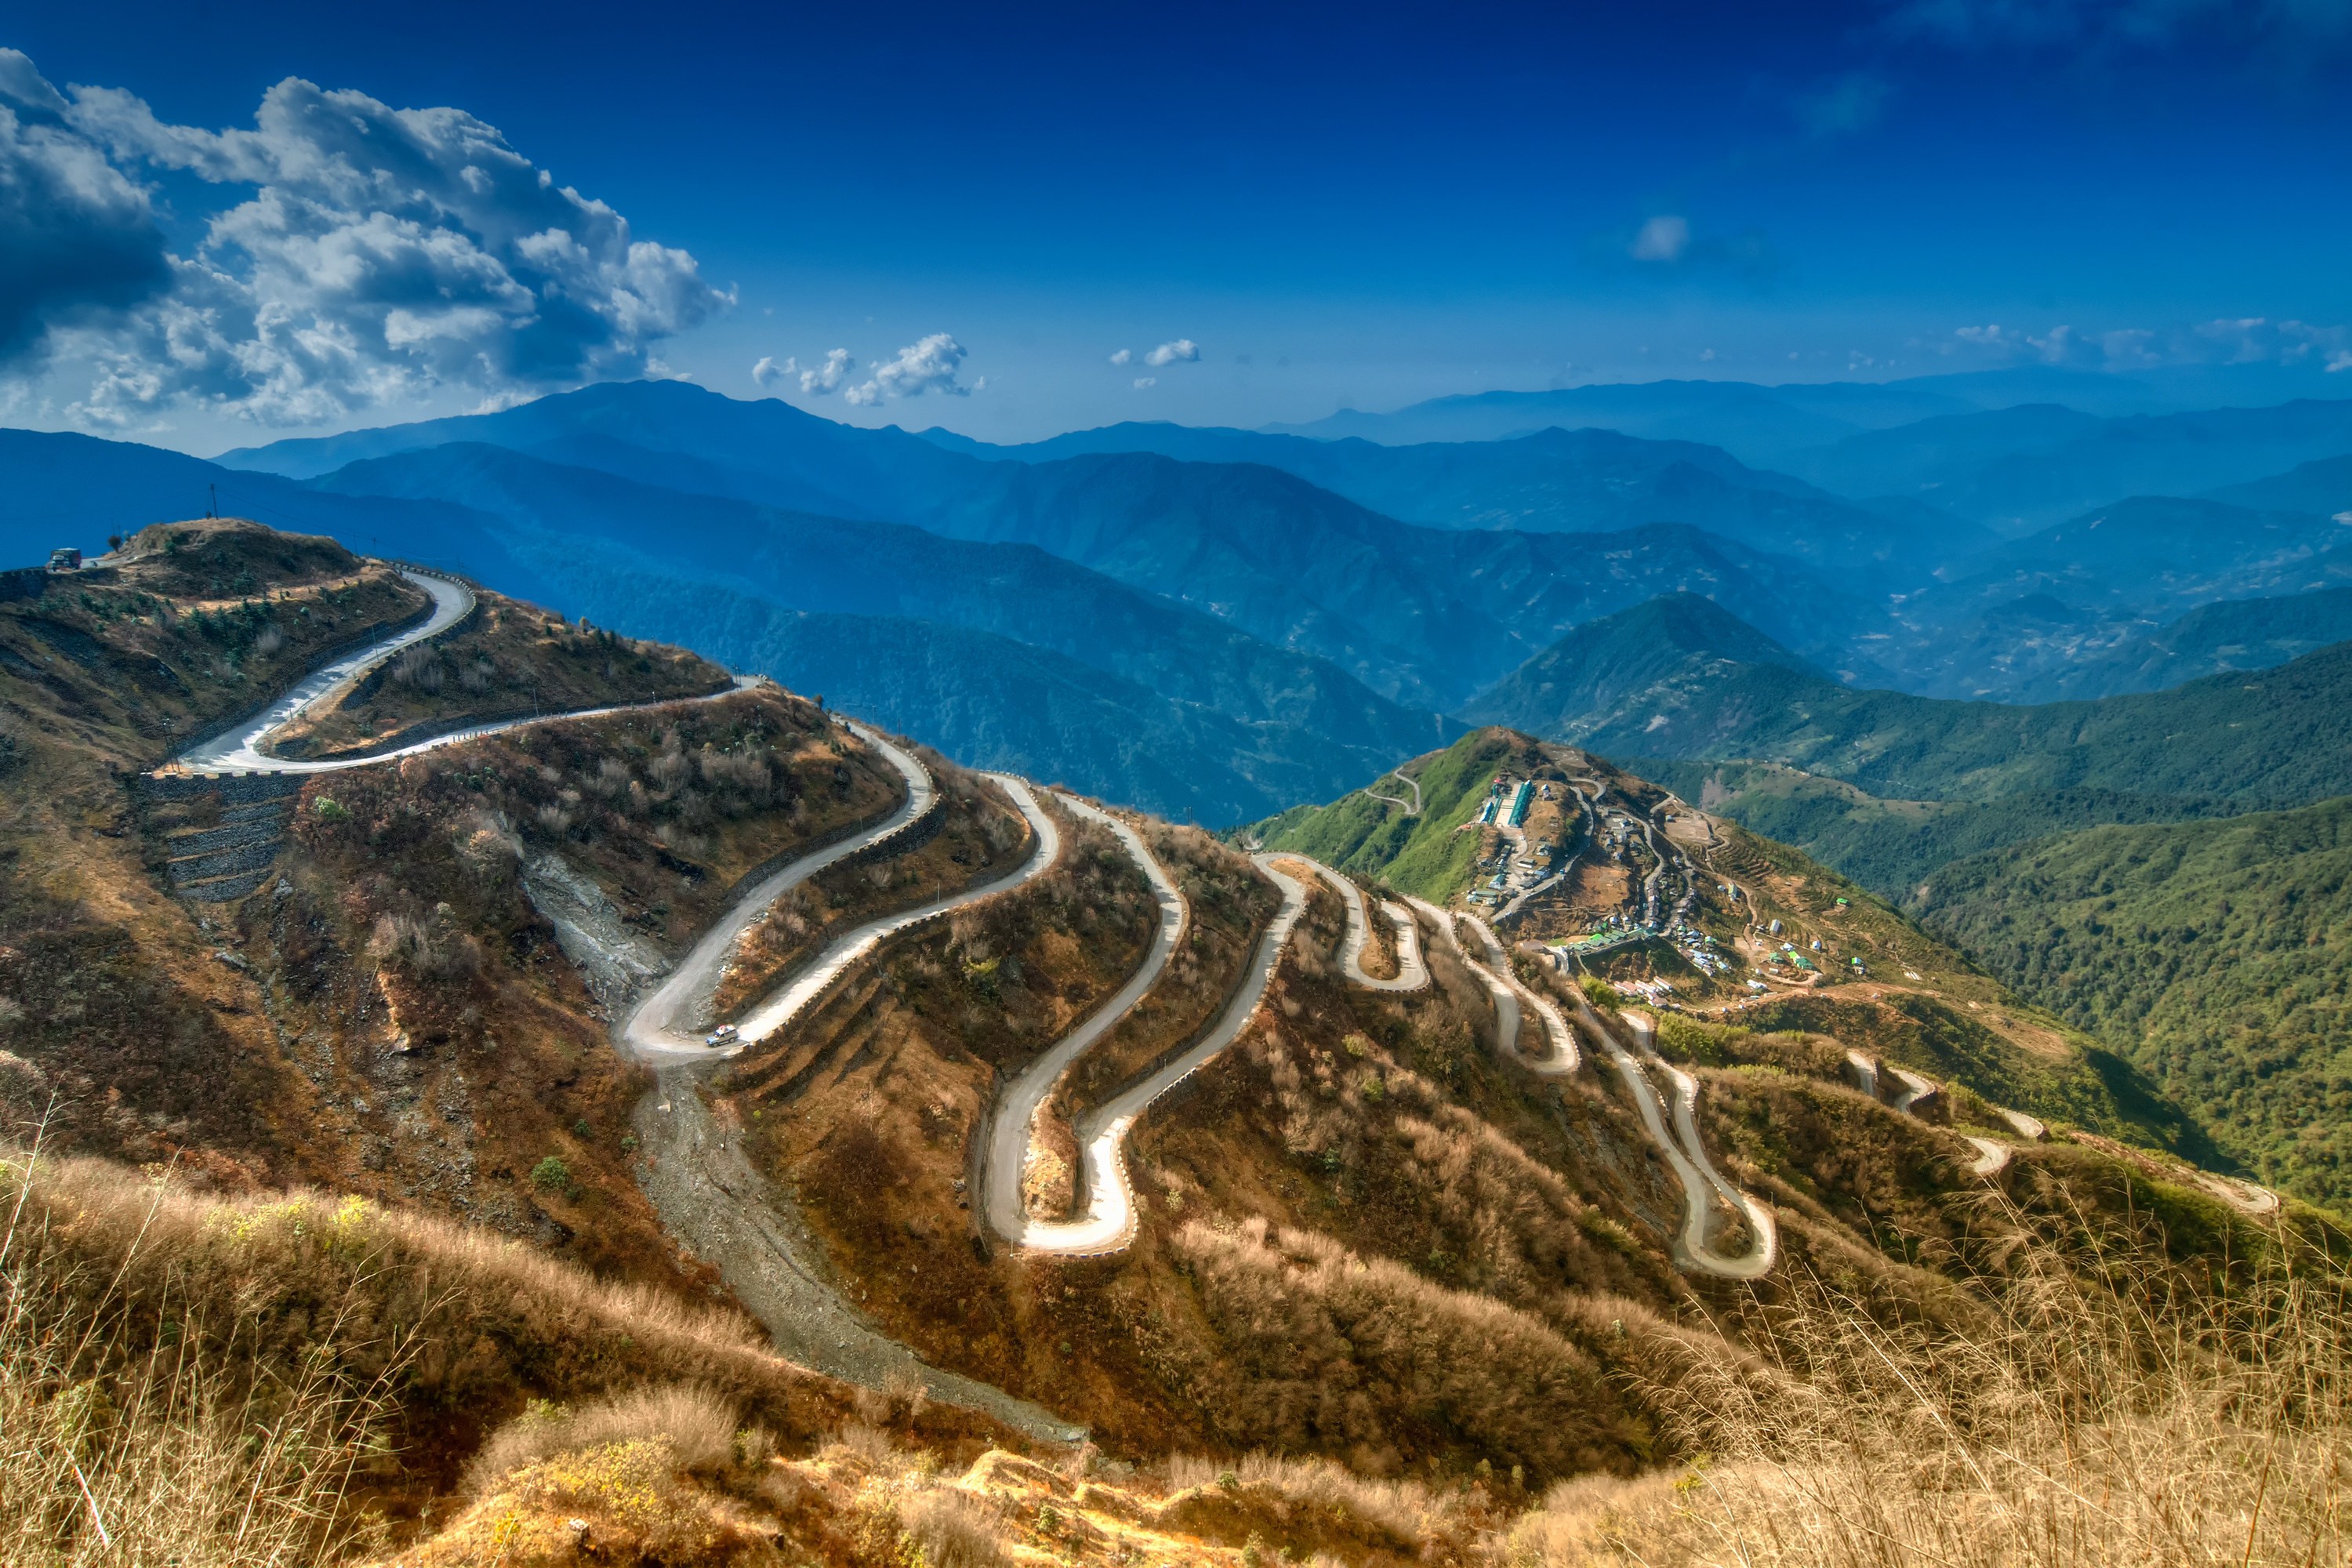 Curvy roads on a road in Sikkim, India.